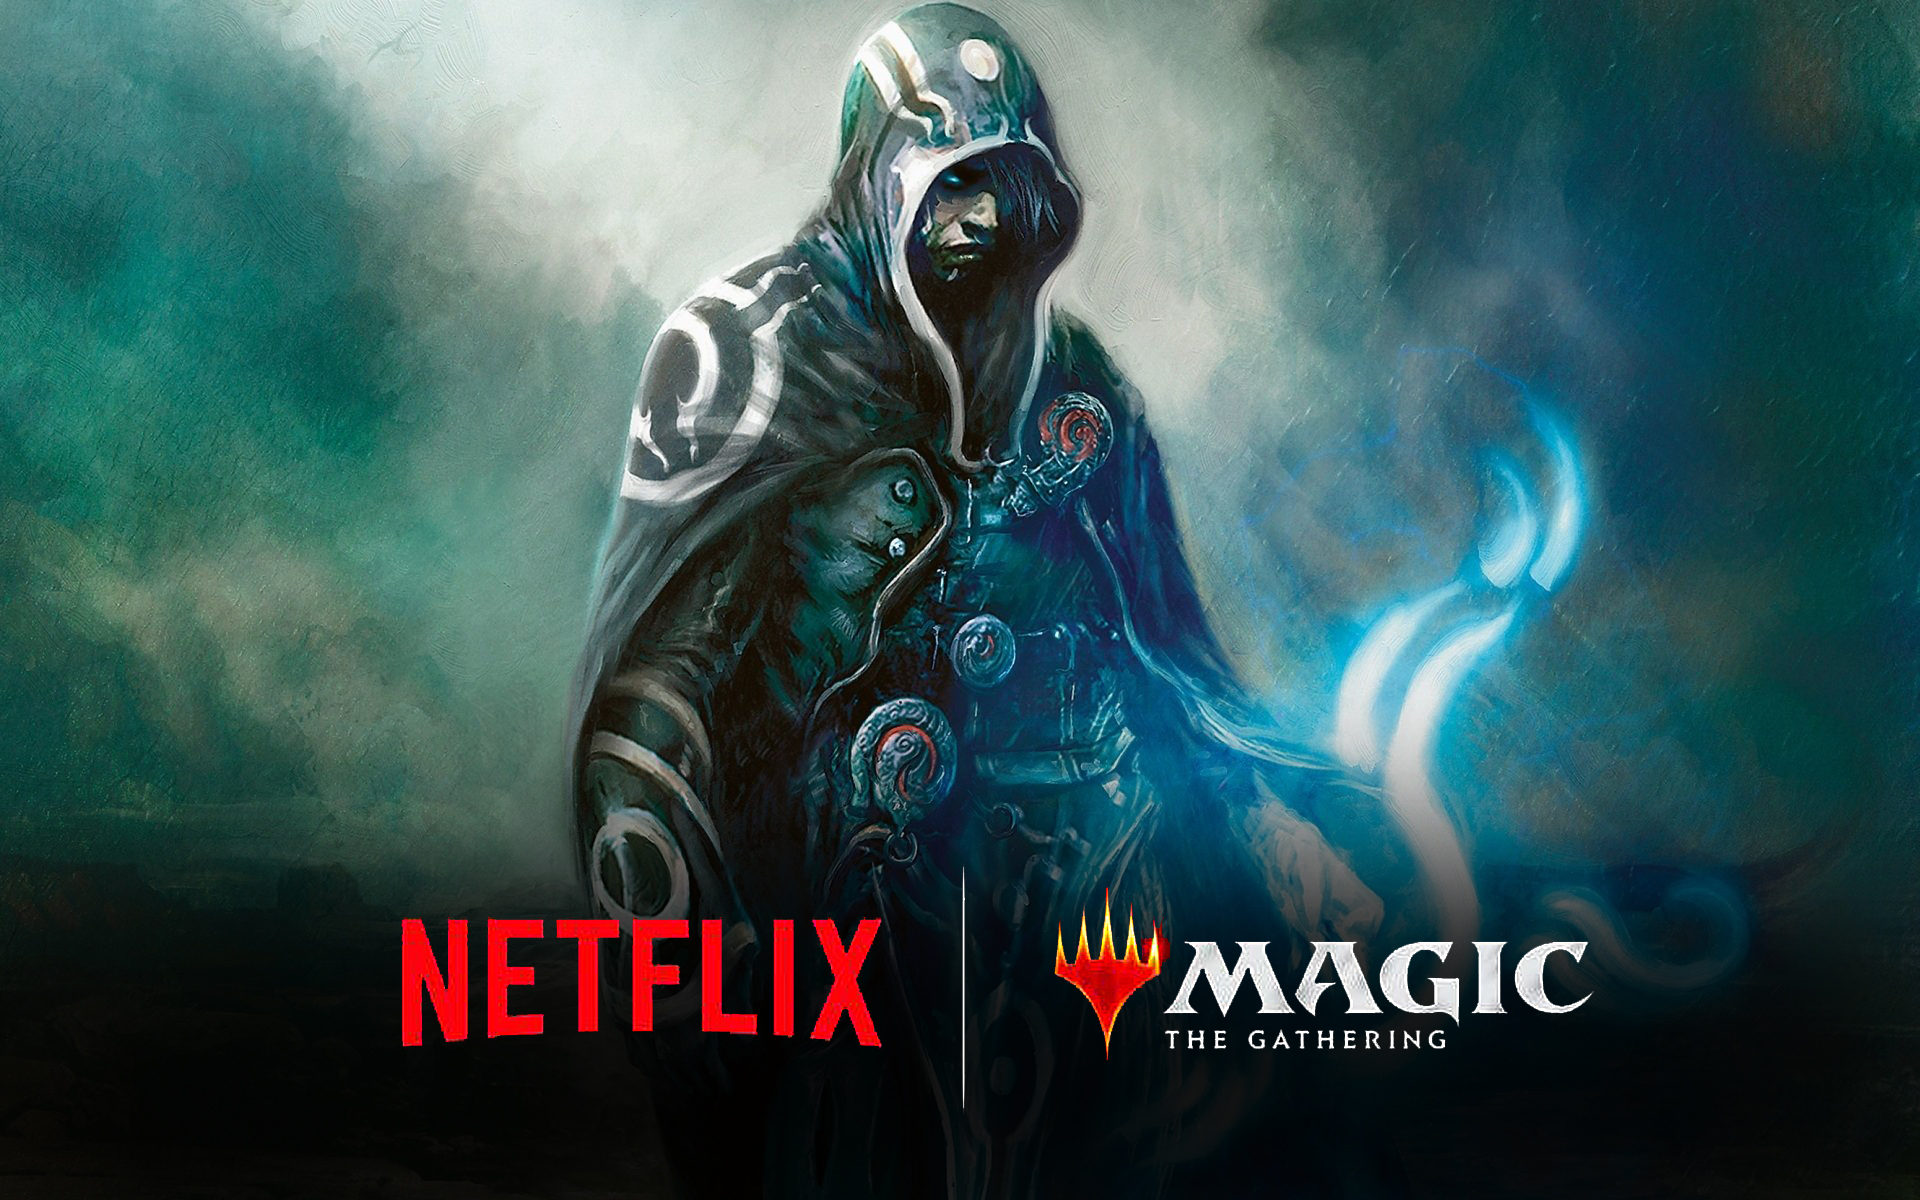 Animated Series of Magic: The Gathering Coming to Netflix